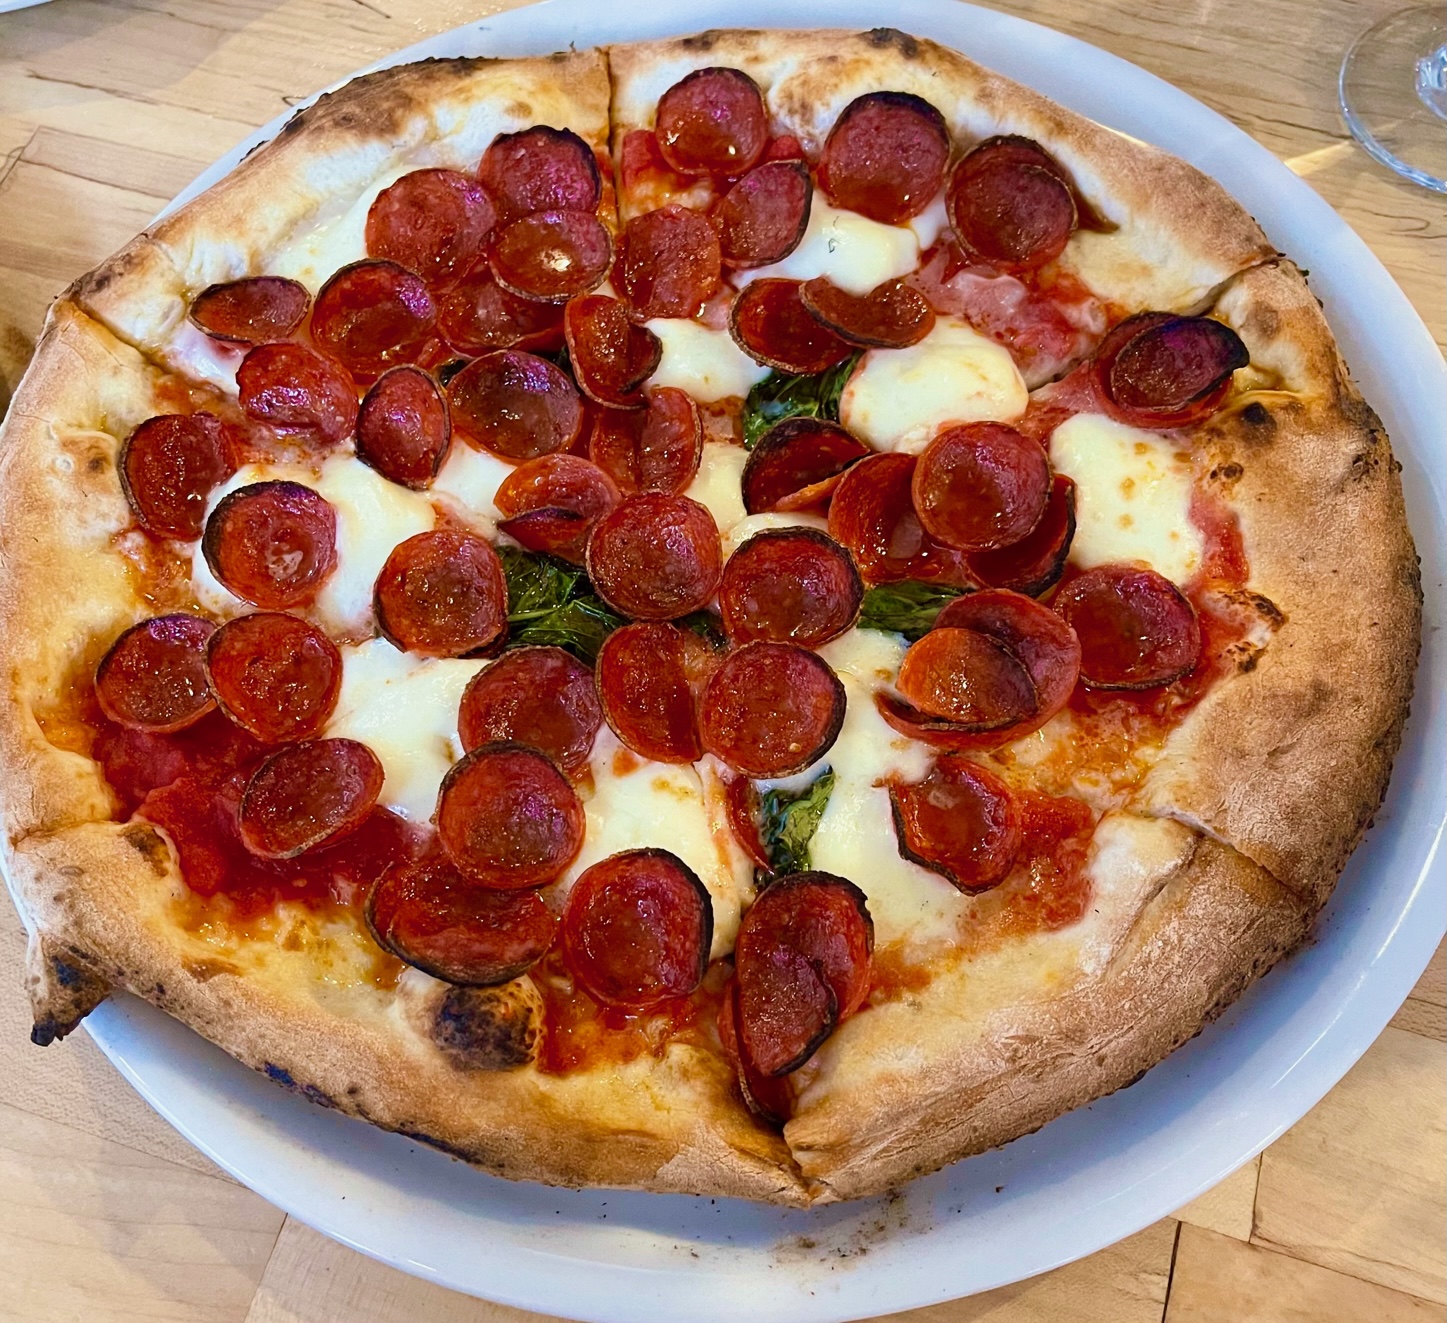 An overhead photo shows a pepperoni pizza from Pizzeria Antica with lots of pepperoni slices and a bit of bail hidden under the cheese. Photo by Stephanie Wheatley.